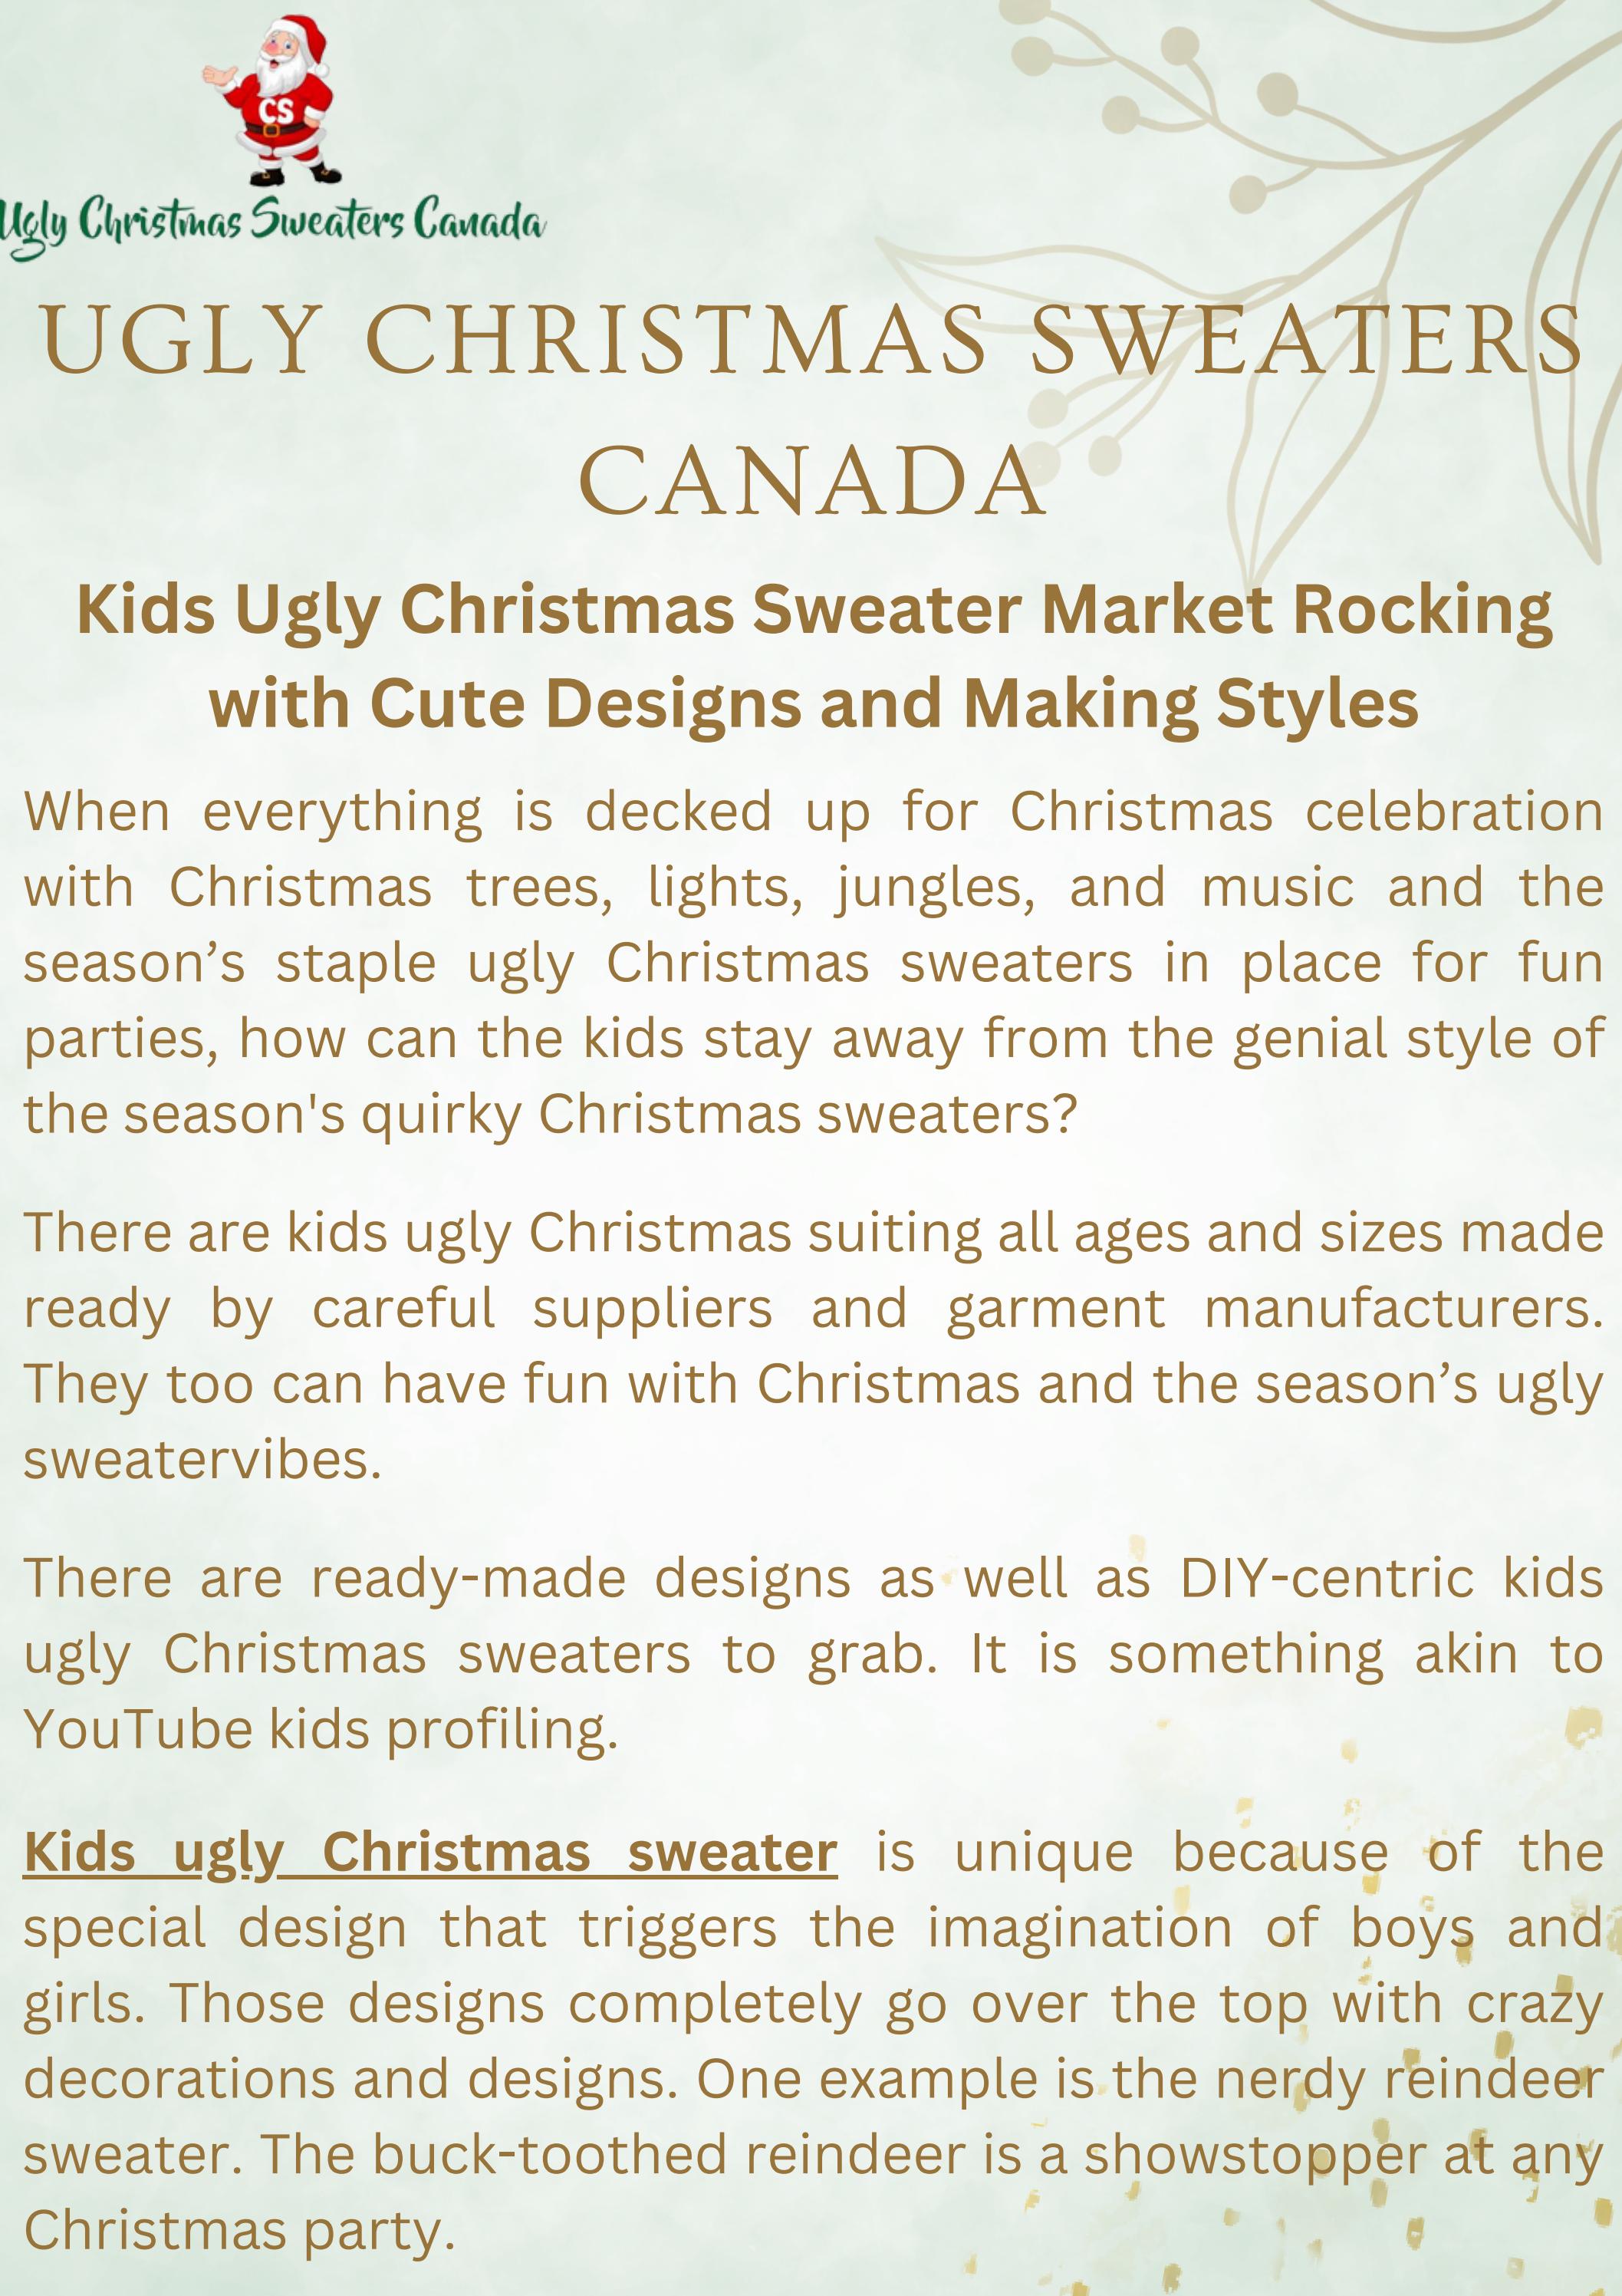 Kids Ugly Christmas Sweater Market Rocking with Cute Designs and Making Styles